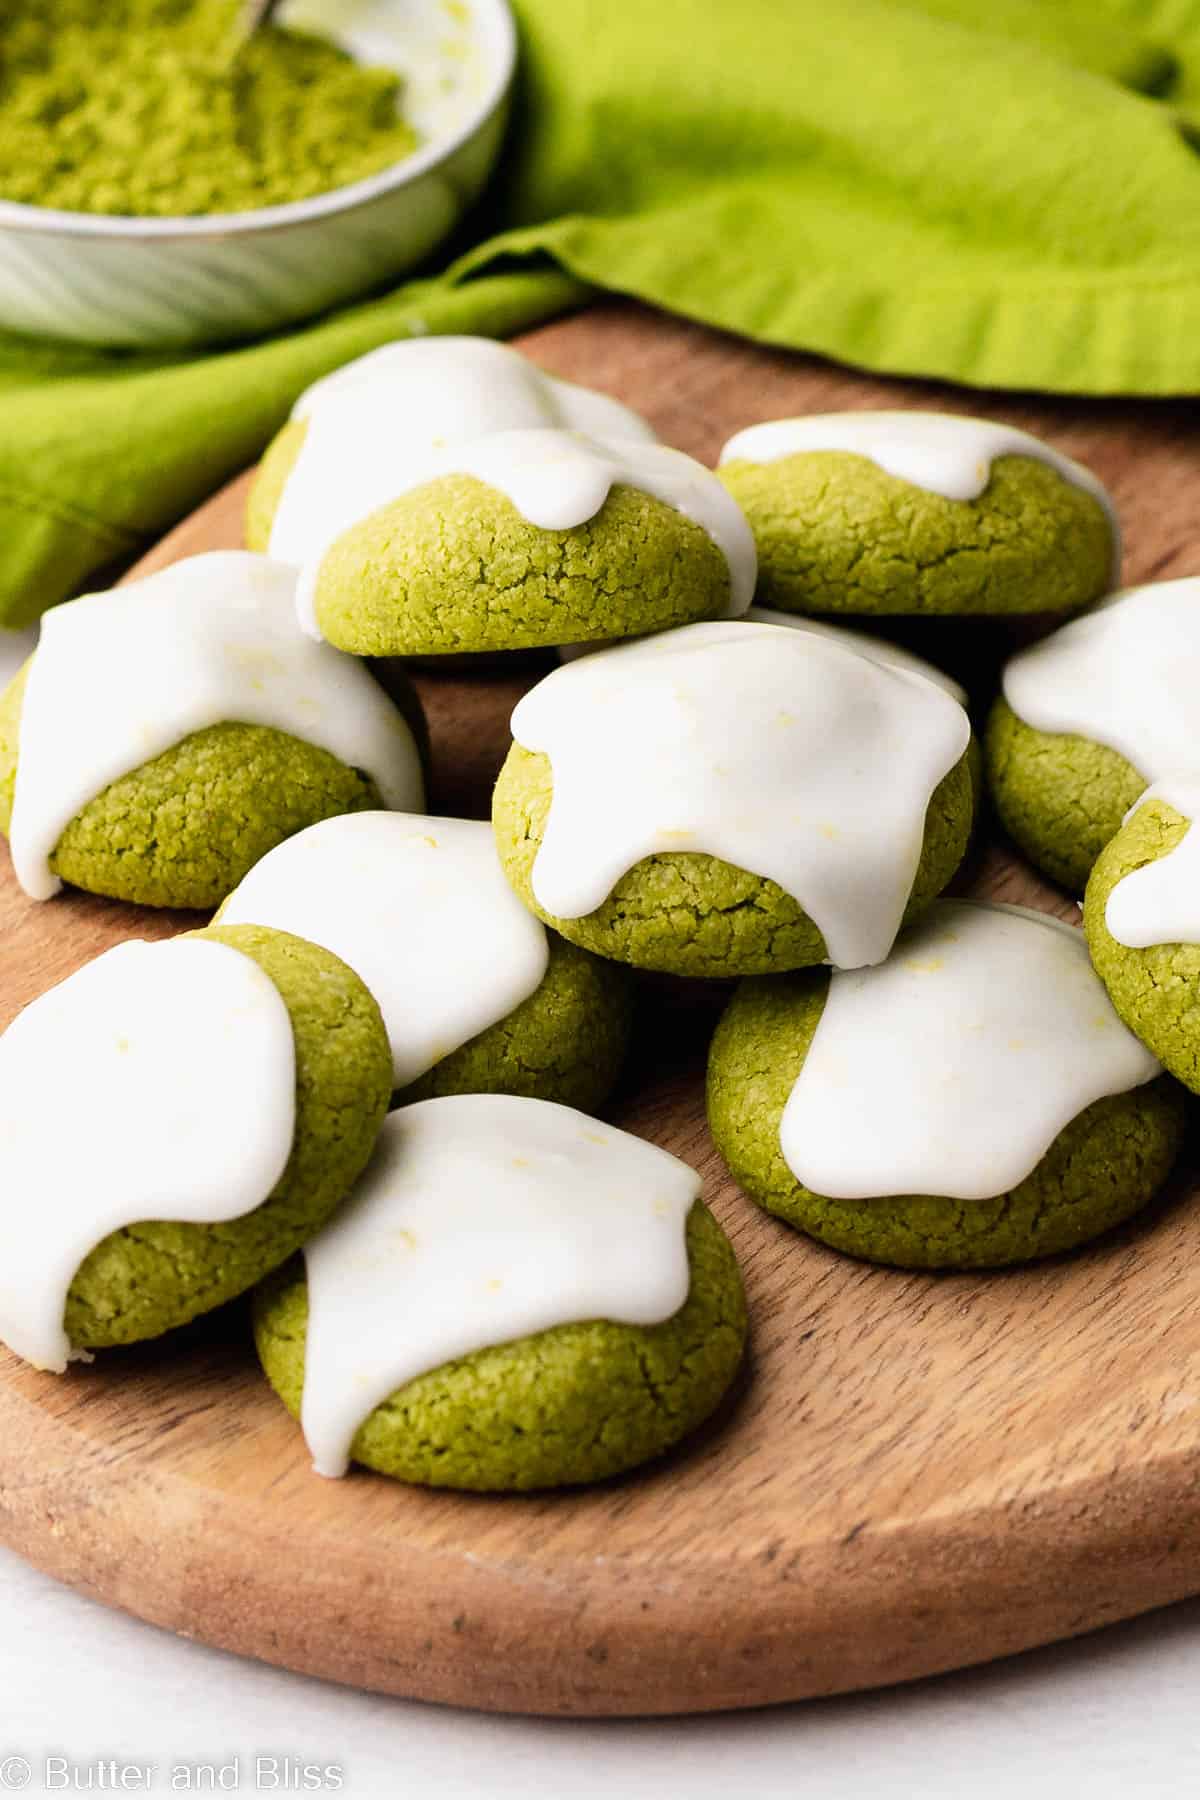 Gluten free matcha cookies with icing on a wooden tray.